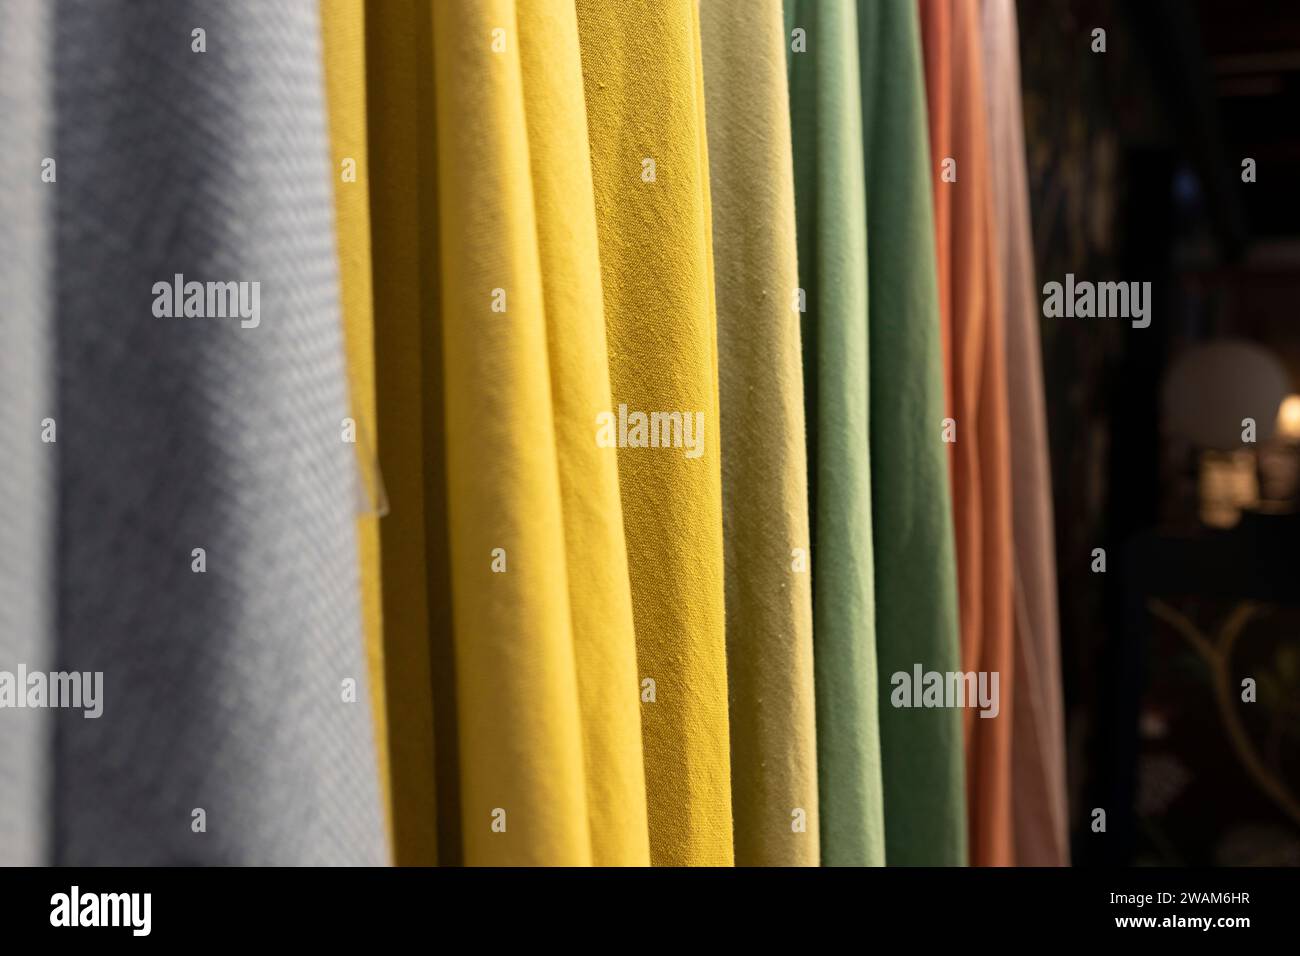 Various wool and silk fabrics are on display at the shop Stock Photo